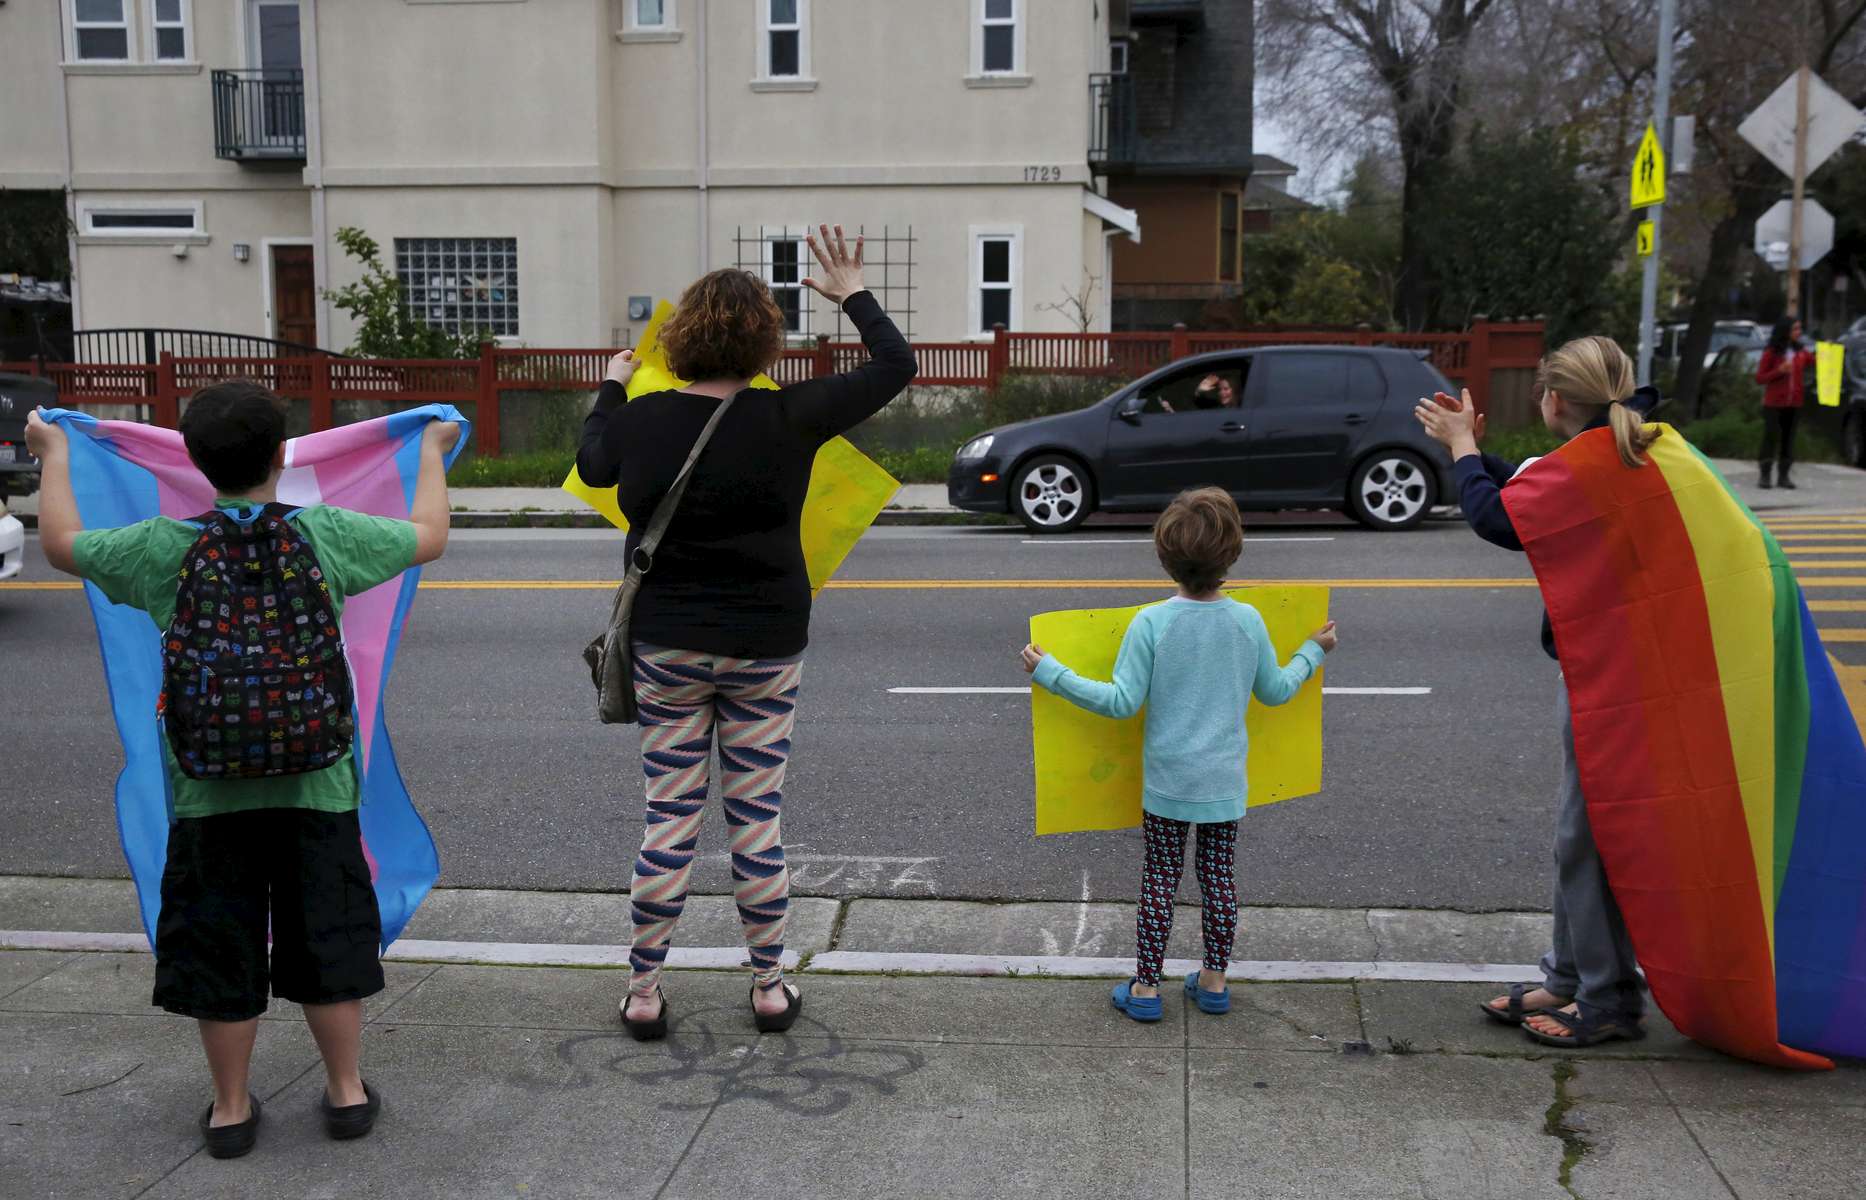 From left, James, 9, Sara and Charley Kaplan, 4, hold signs and cheer with other students and parents at a rally for Gavin Grimm organized by Sara outside of Malcom X Elementary School Feb. 15, 2016 in Berkeley, Calif. Grimm, a transgender teenager, sued the school board of his Virginia high school for the right to use the bathroom that corresponds with his gender identity. Sara Kaplan organized a rally that was one of many coordinated across the nation in support of Grimm before his case was to be seen by the Supreme Court.